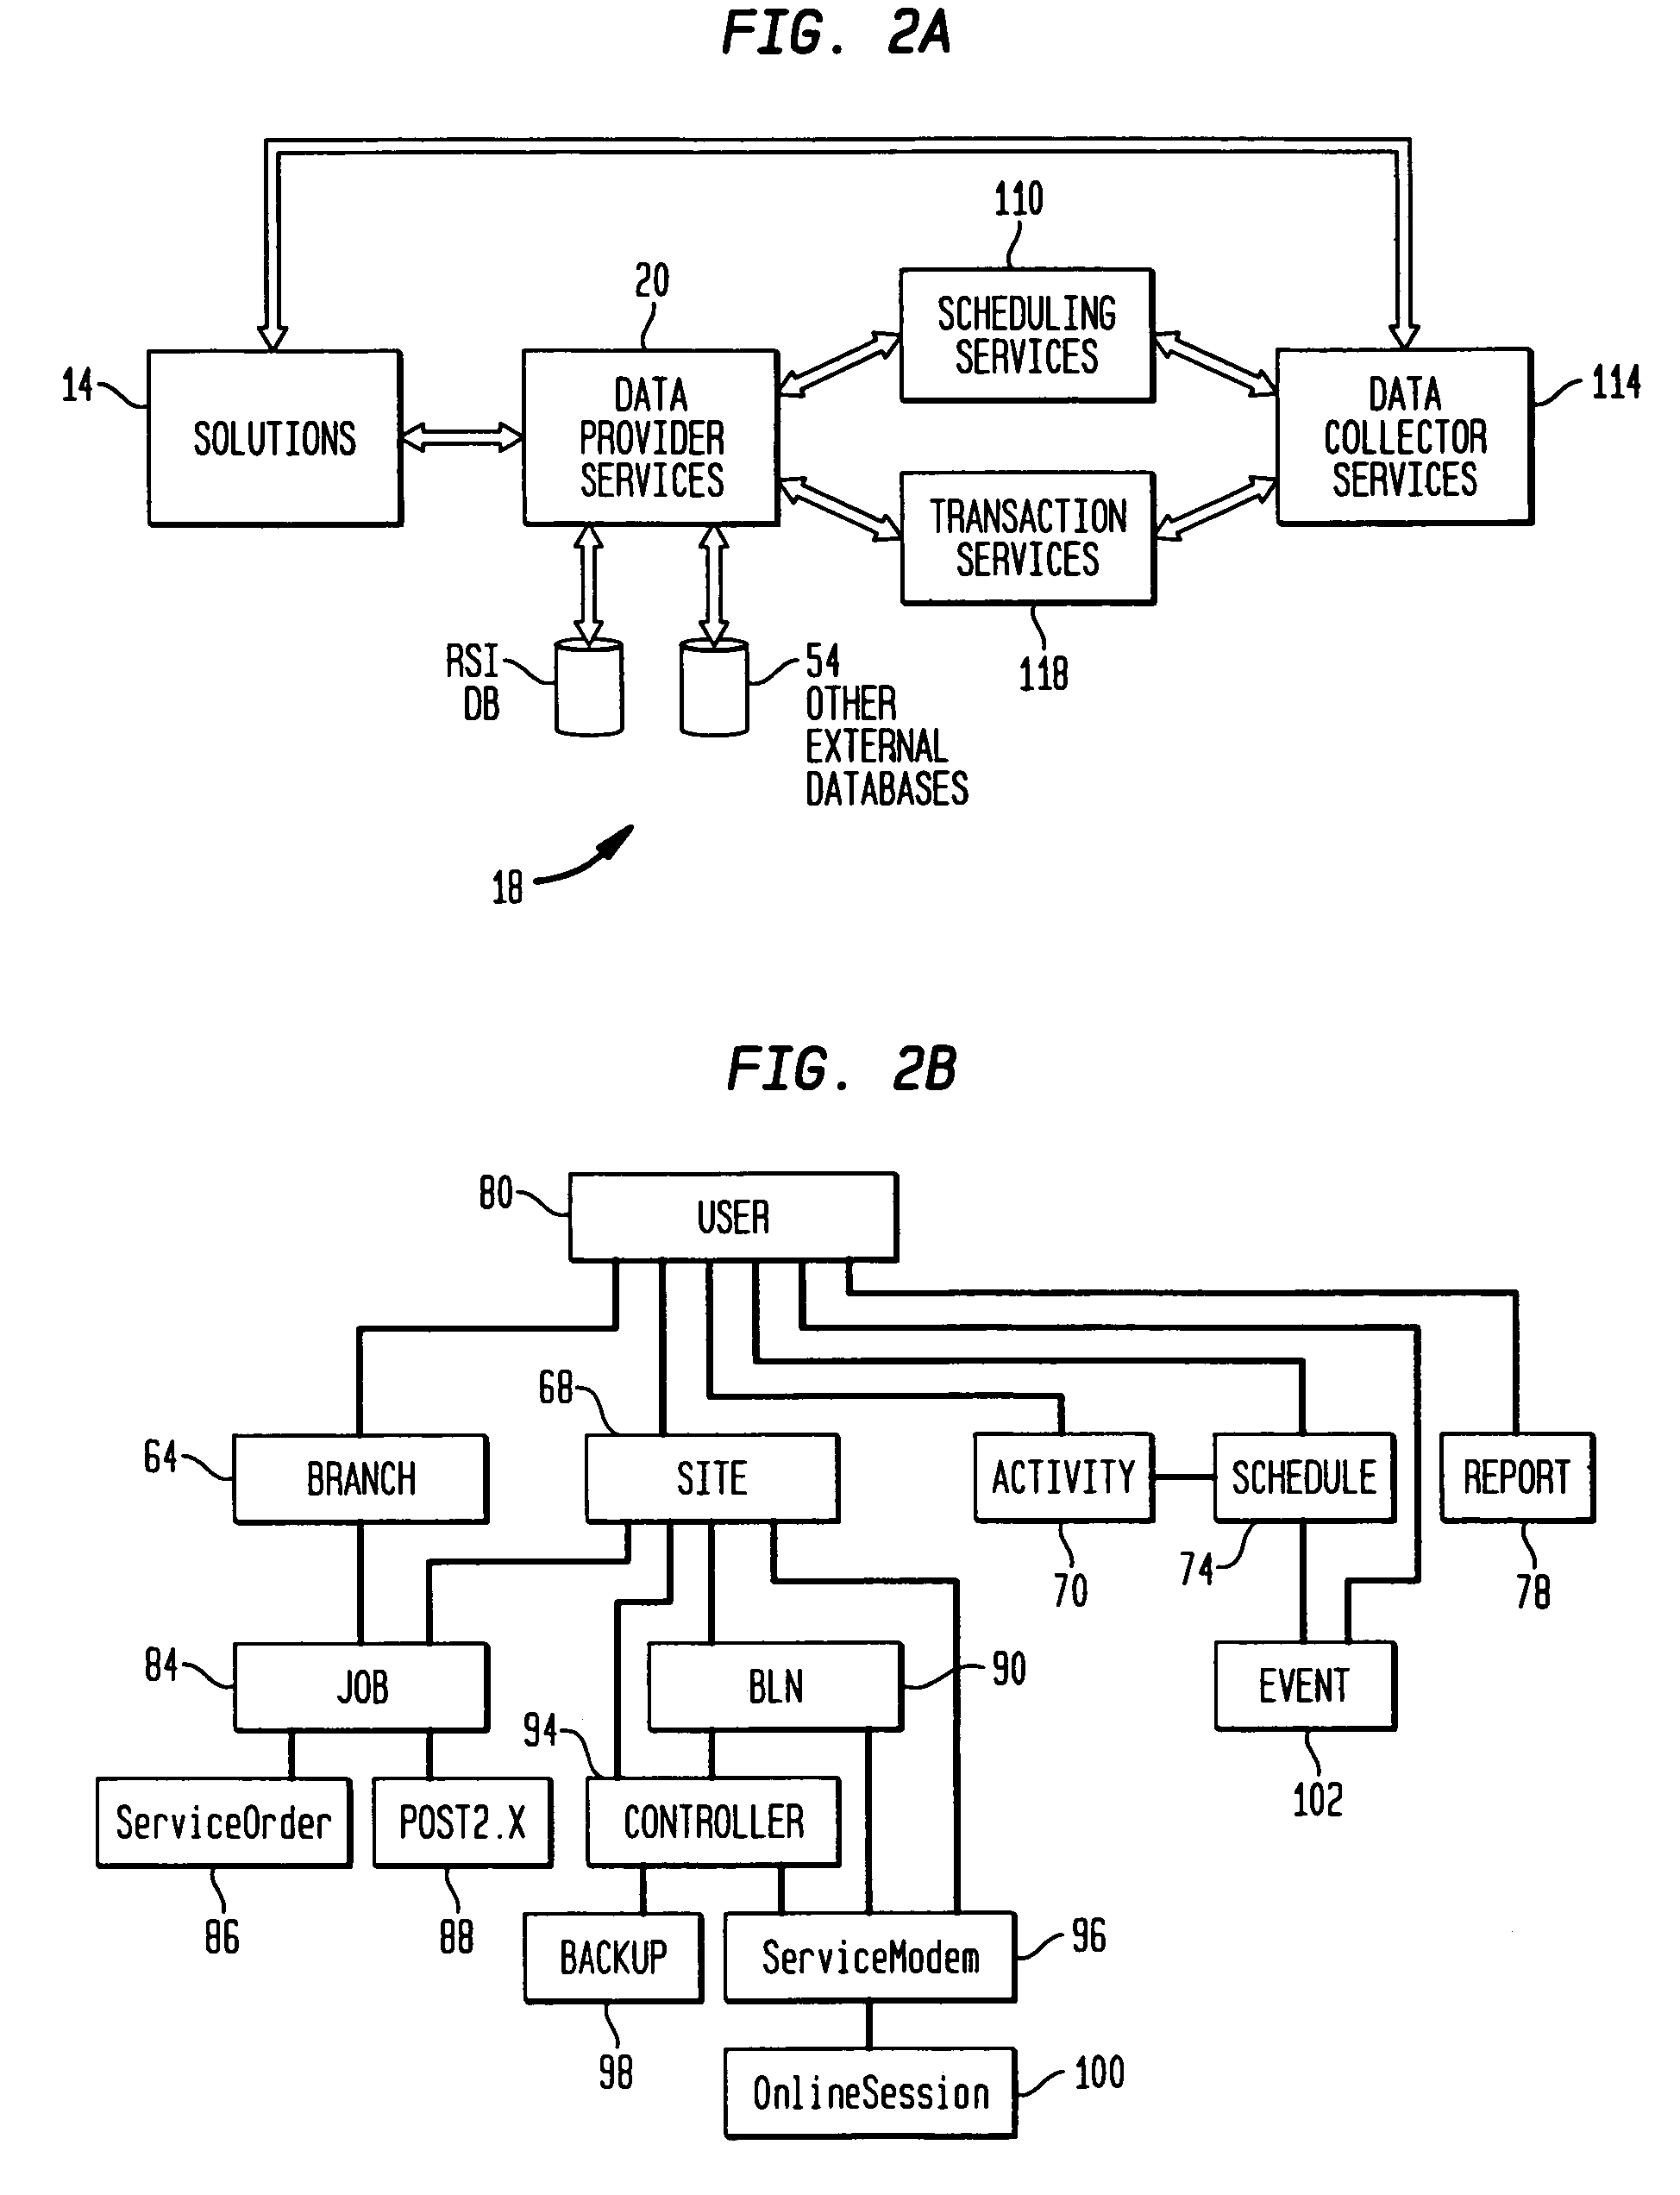 Method and system for obtaining service related information about equipment located at a plurality of sites